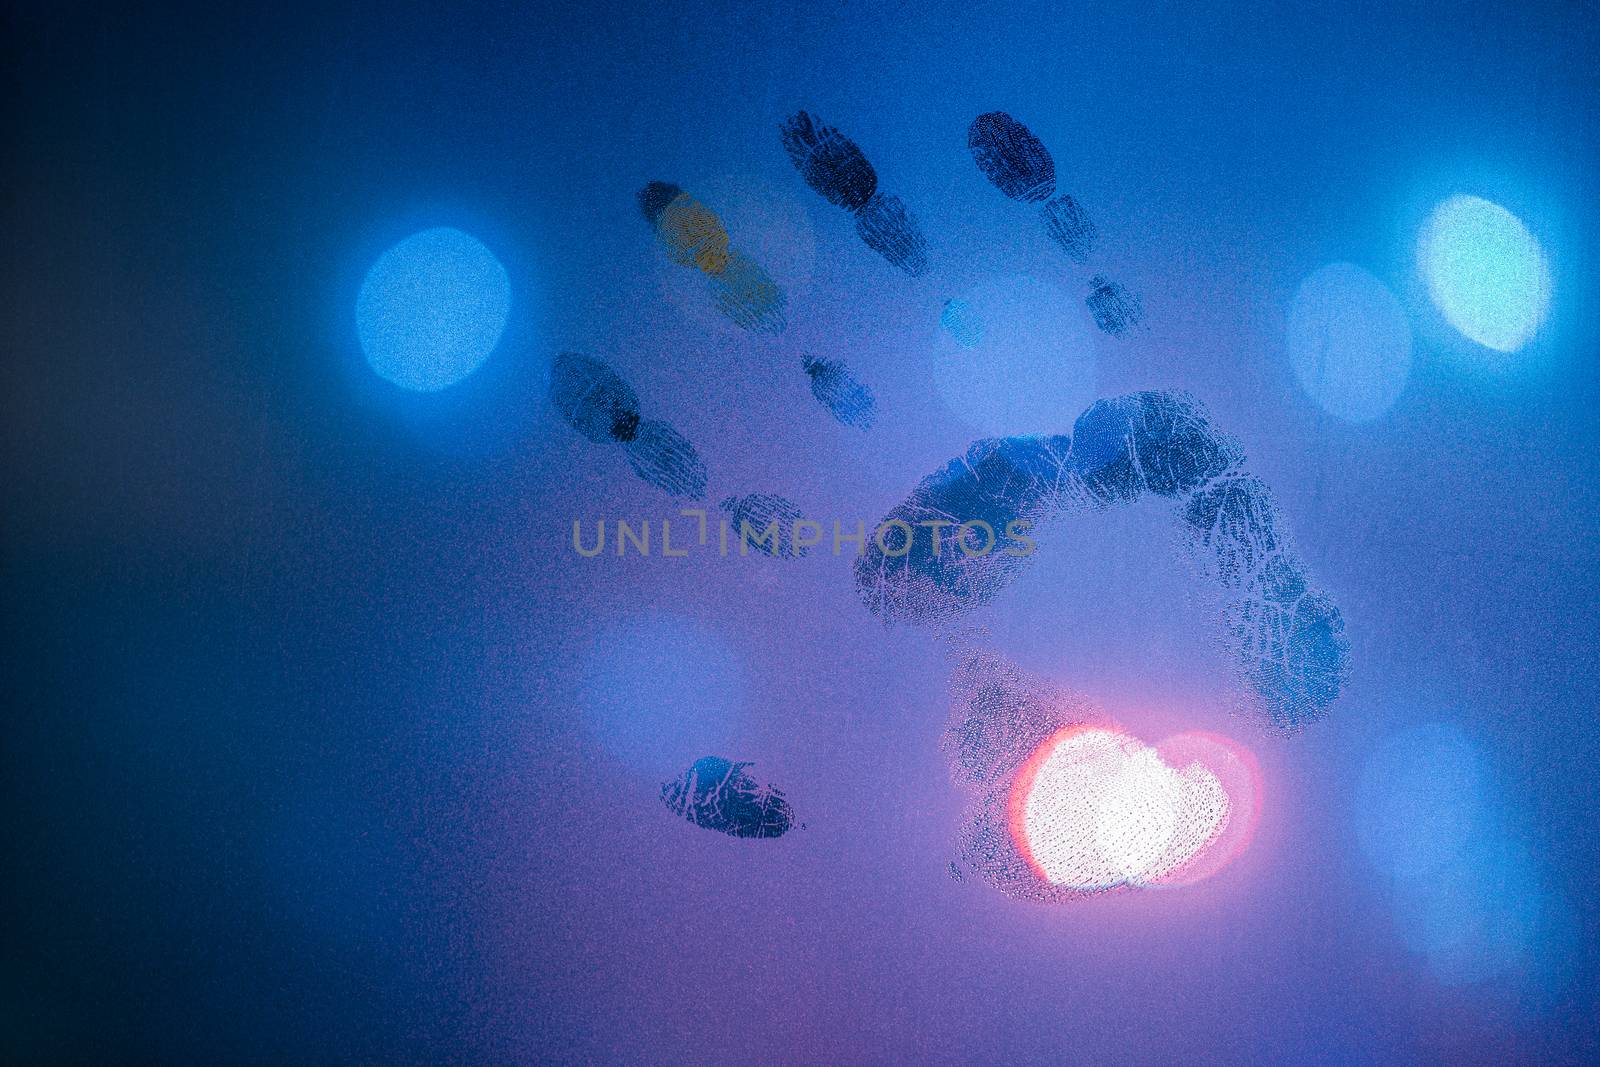 handprint on night wet glass in cold blue colors with blurry street light in backround.